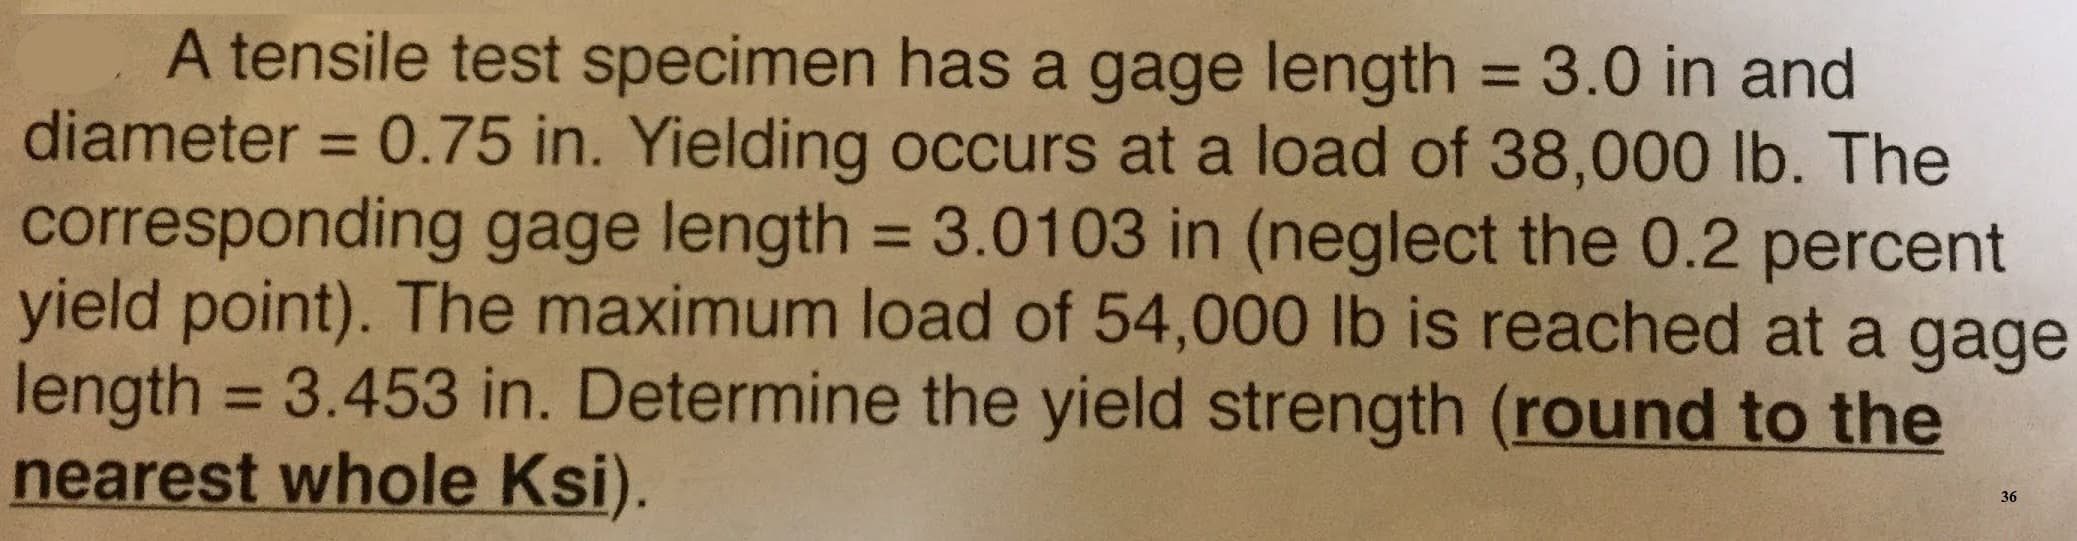 A tensile test specimen has a gage length = 3.0 in and
diameter 0.75 in. Yielding occurs at a load of 38,000 lb. The
corresponding gage length 3.01 03 in (neglect the 0.2 percent
yield point). The maximum load of 54,000 lb is reached at a gage
length 3.453 in. Determine the yield strength (round to the
nearest whole Ksi).
36
